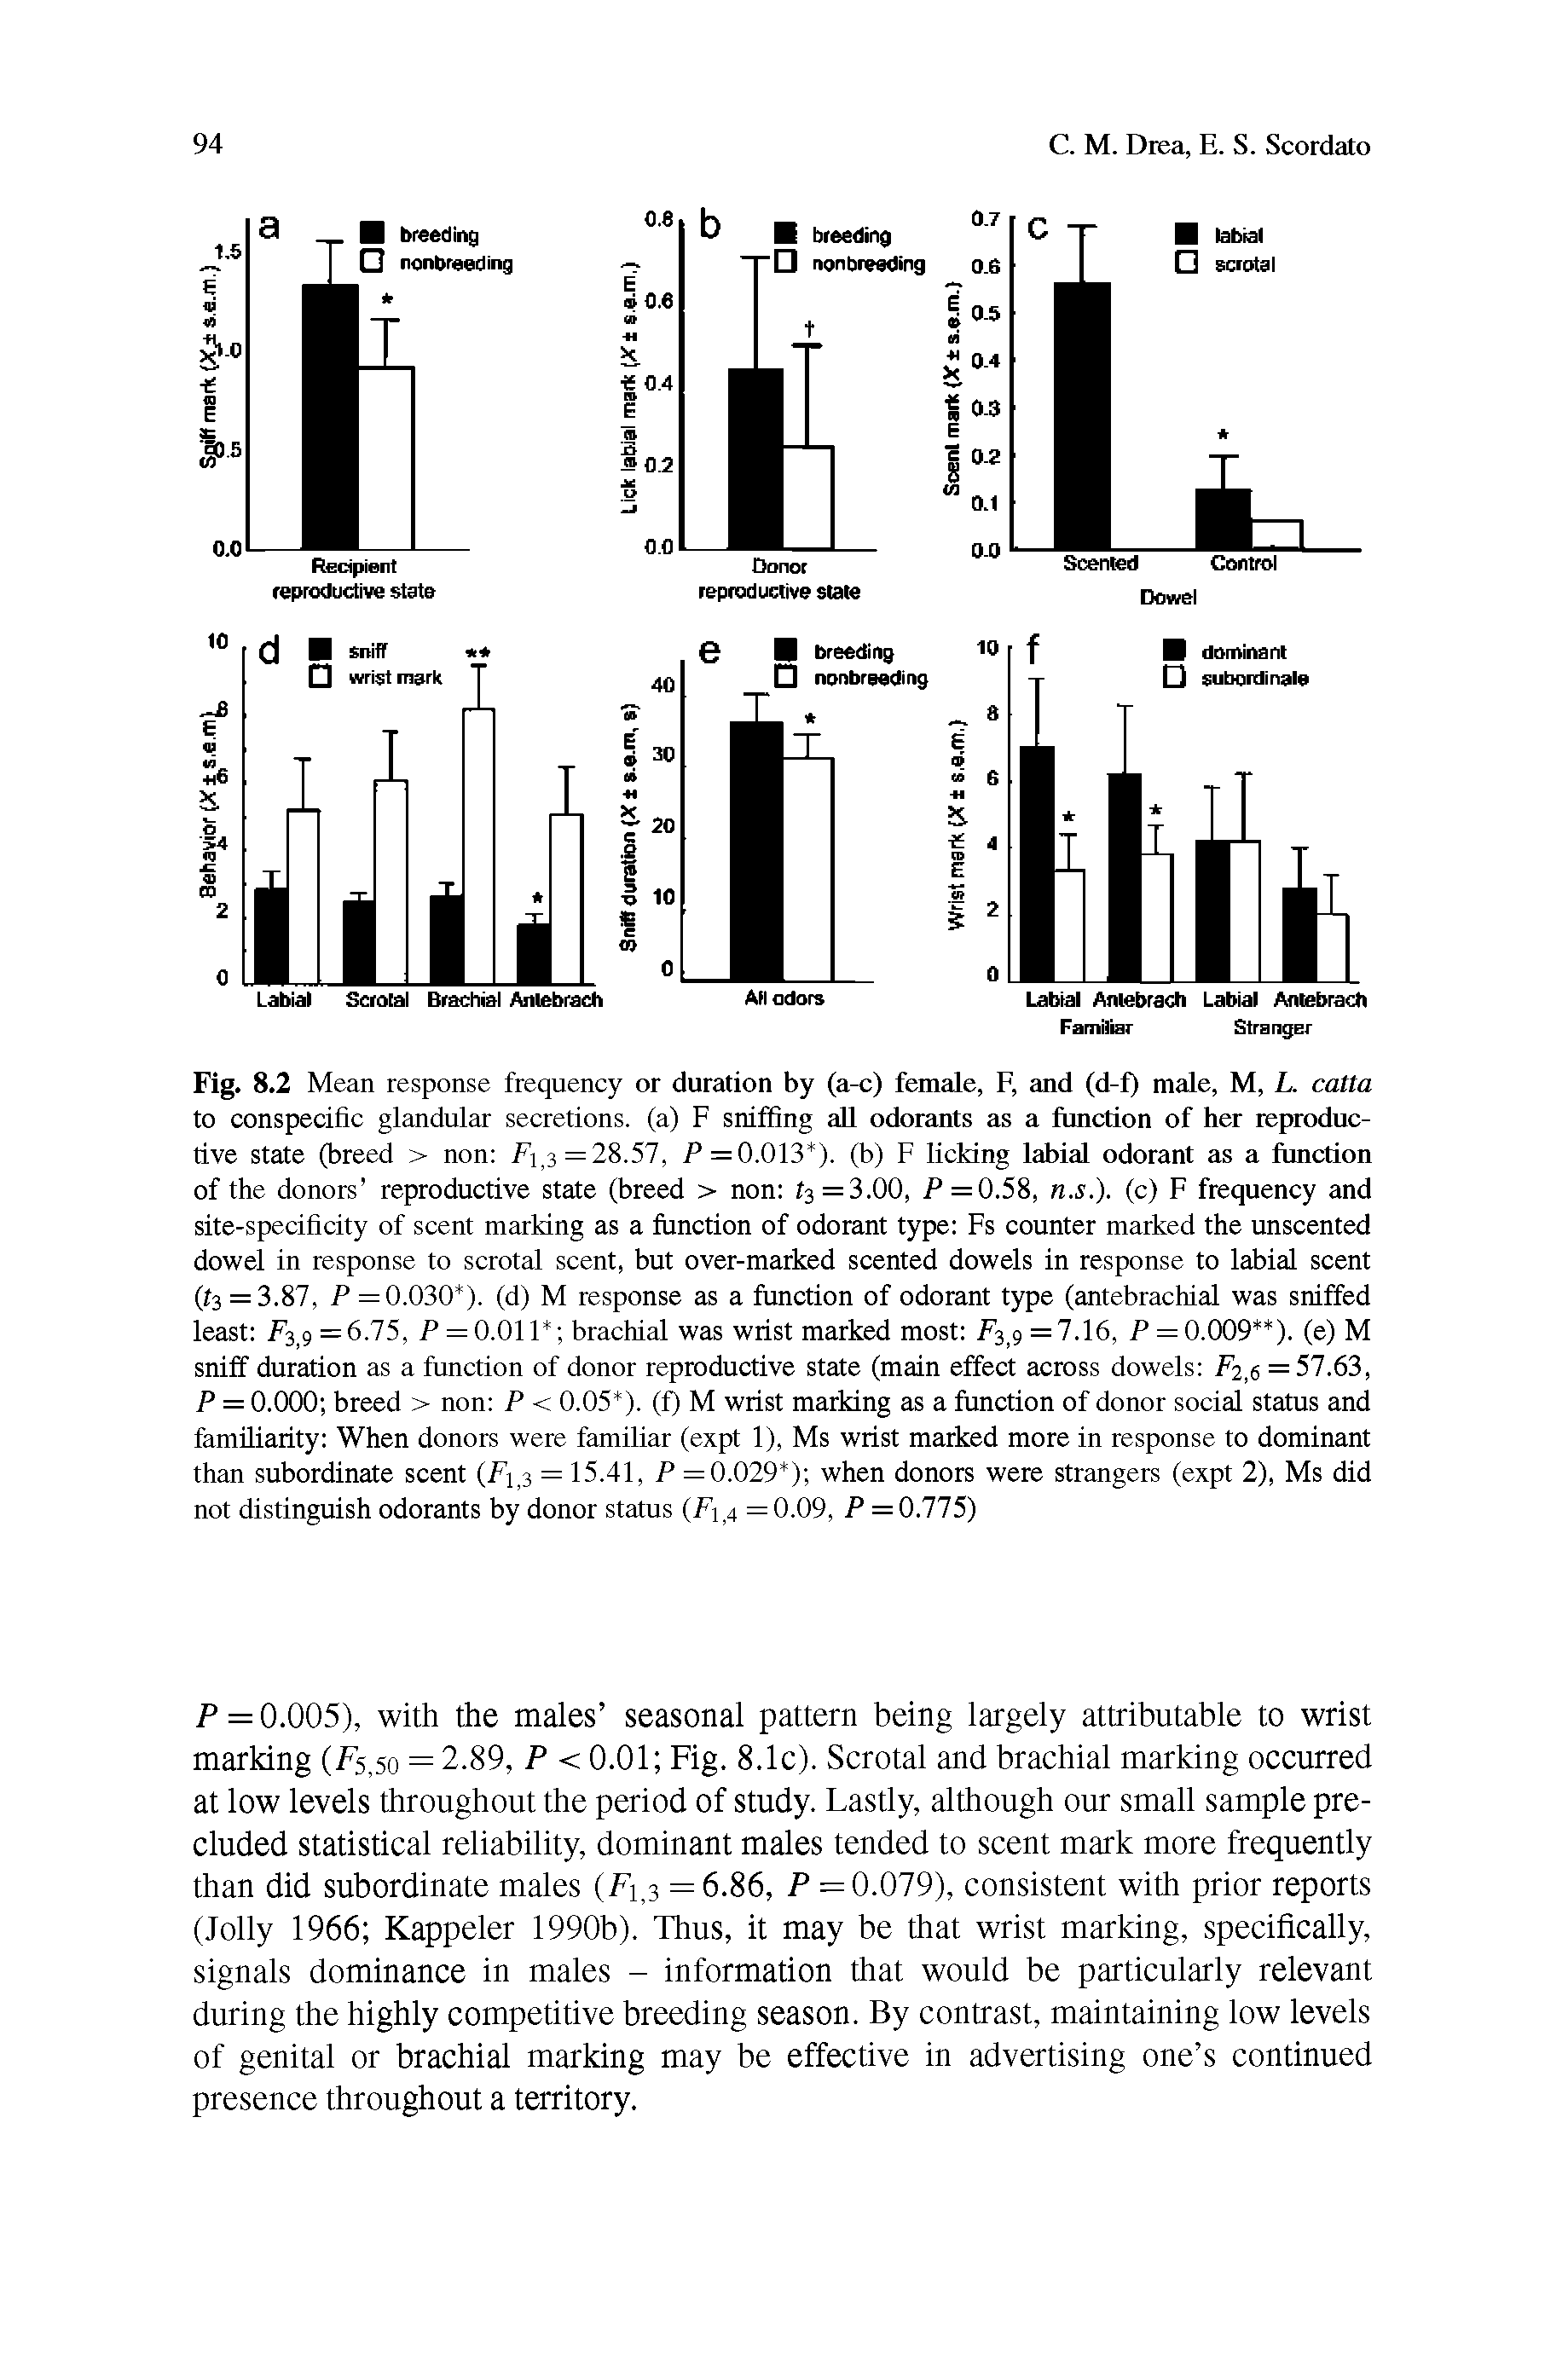 Fig. 8.2 Mean response frequency or duration by (a-c) female, F, and (d-f) male, M, L. catta to conspecific glandular secretions, (a) F sniffing all odorants as a function of her reproductive state (breed > non F 3 =28.57, P =0.013 ). (b) F licking labial odorant as a function of the donors reproductive state (breed > non t =3.00, P= 0.58, n.s.). (c) F frequency and site-specificity of scent marking as a function of odorant type Fs counter marked the unscented dowel in response to scrotal scent, but over-marked scented dowels in response to labial scent (ti = 3.87, P =0.030 ). (d) M response as a function of odorant type (antebrachial was sniffed least = 6.75, P = 0.011 brachial was wrist marked most Fs = 7.16, P = 0.009 ). (e) M...